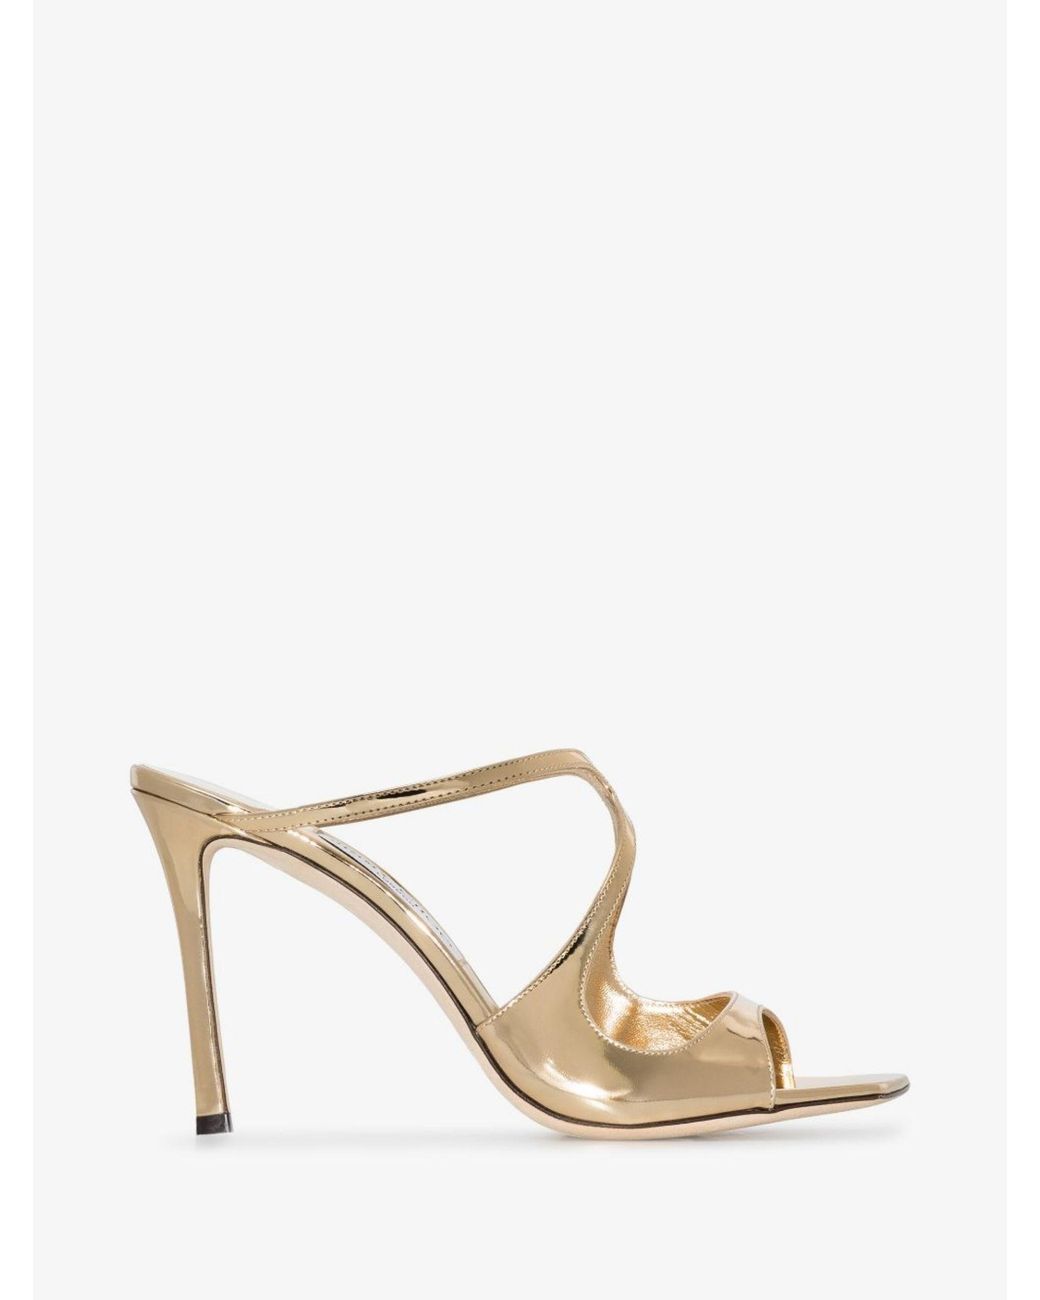 Jimmy Choo Anise 95 Leather Sandals in Gold (Metallic) - Lyst